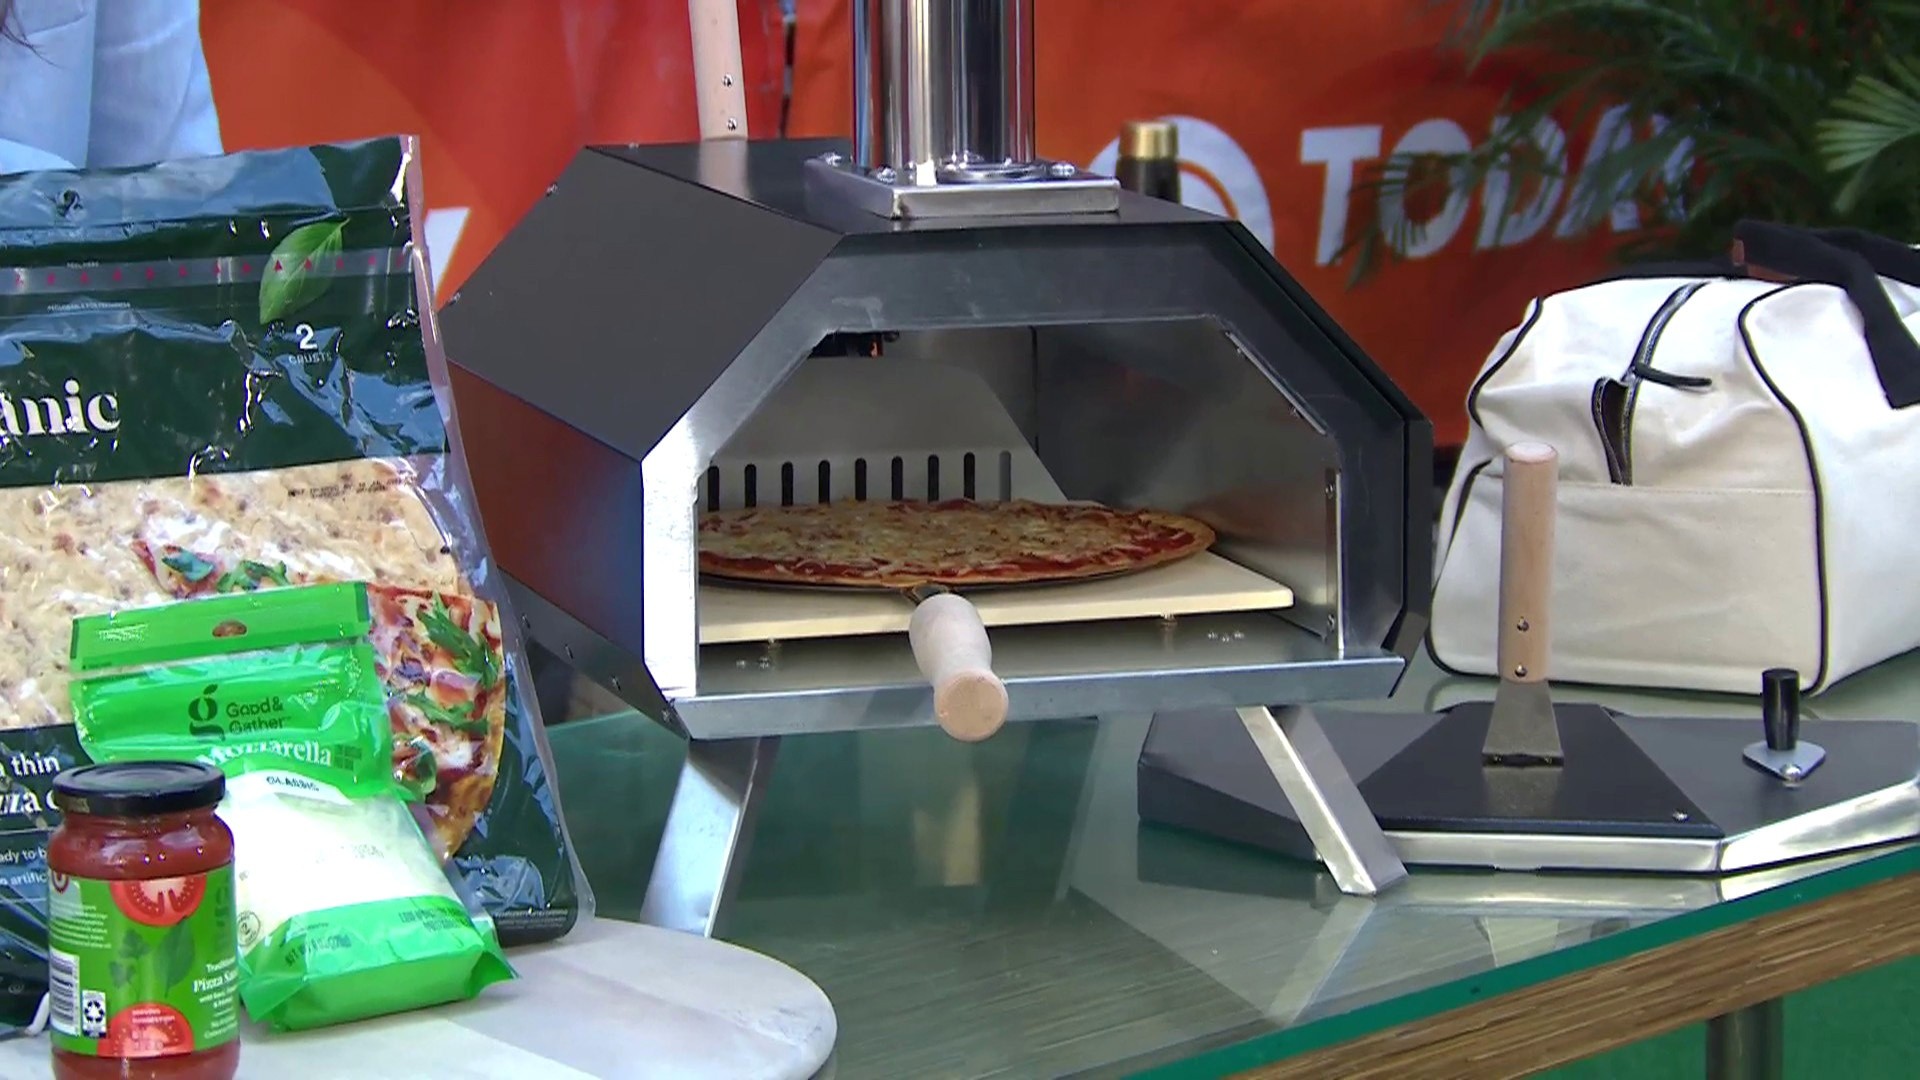 Best pizza oven deals: Get an Ooni pizza oven up to 30% off